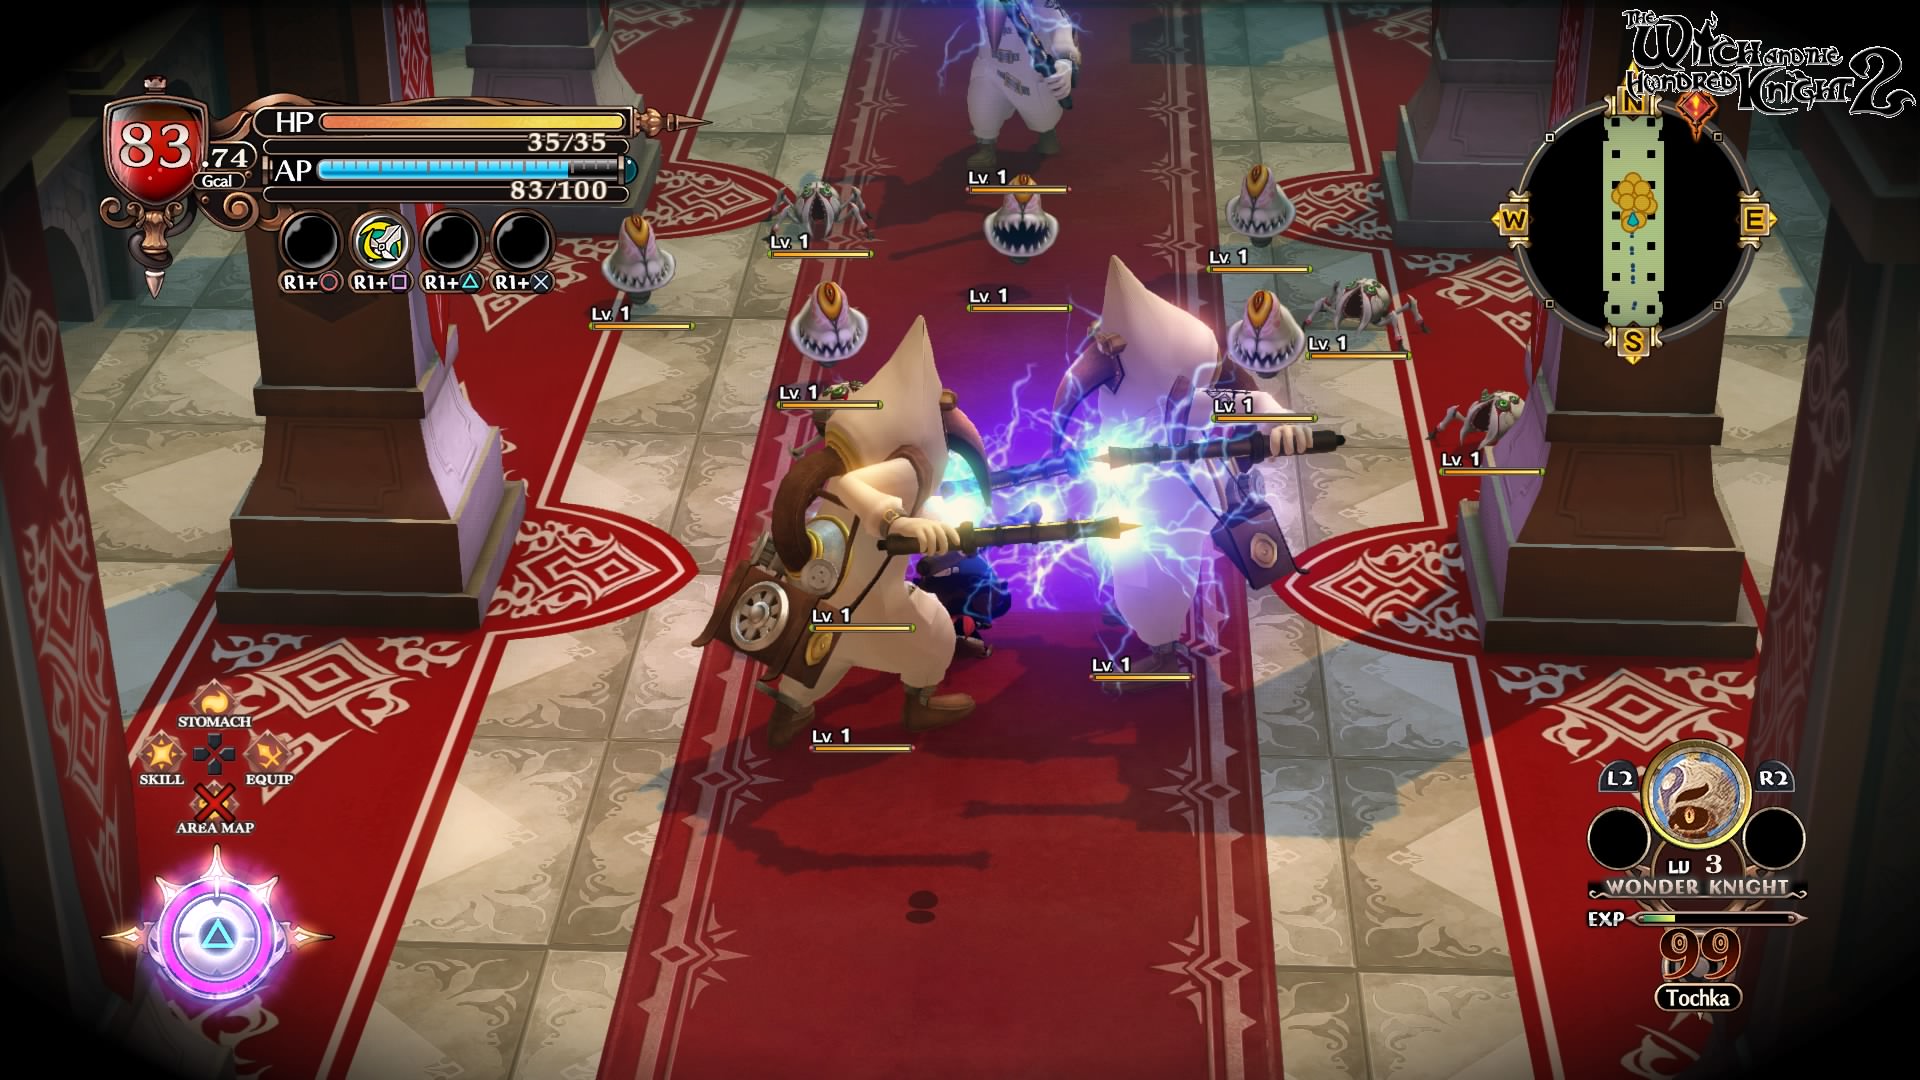 hundred knight review